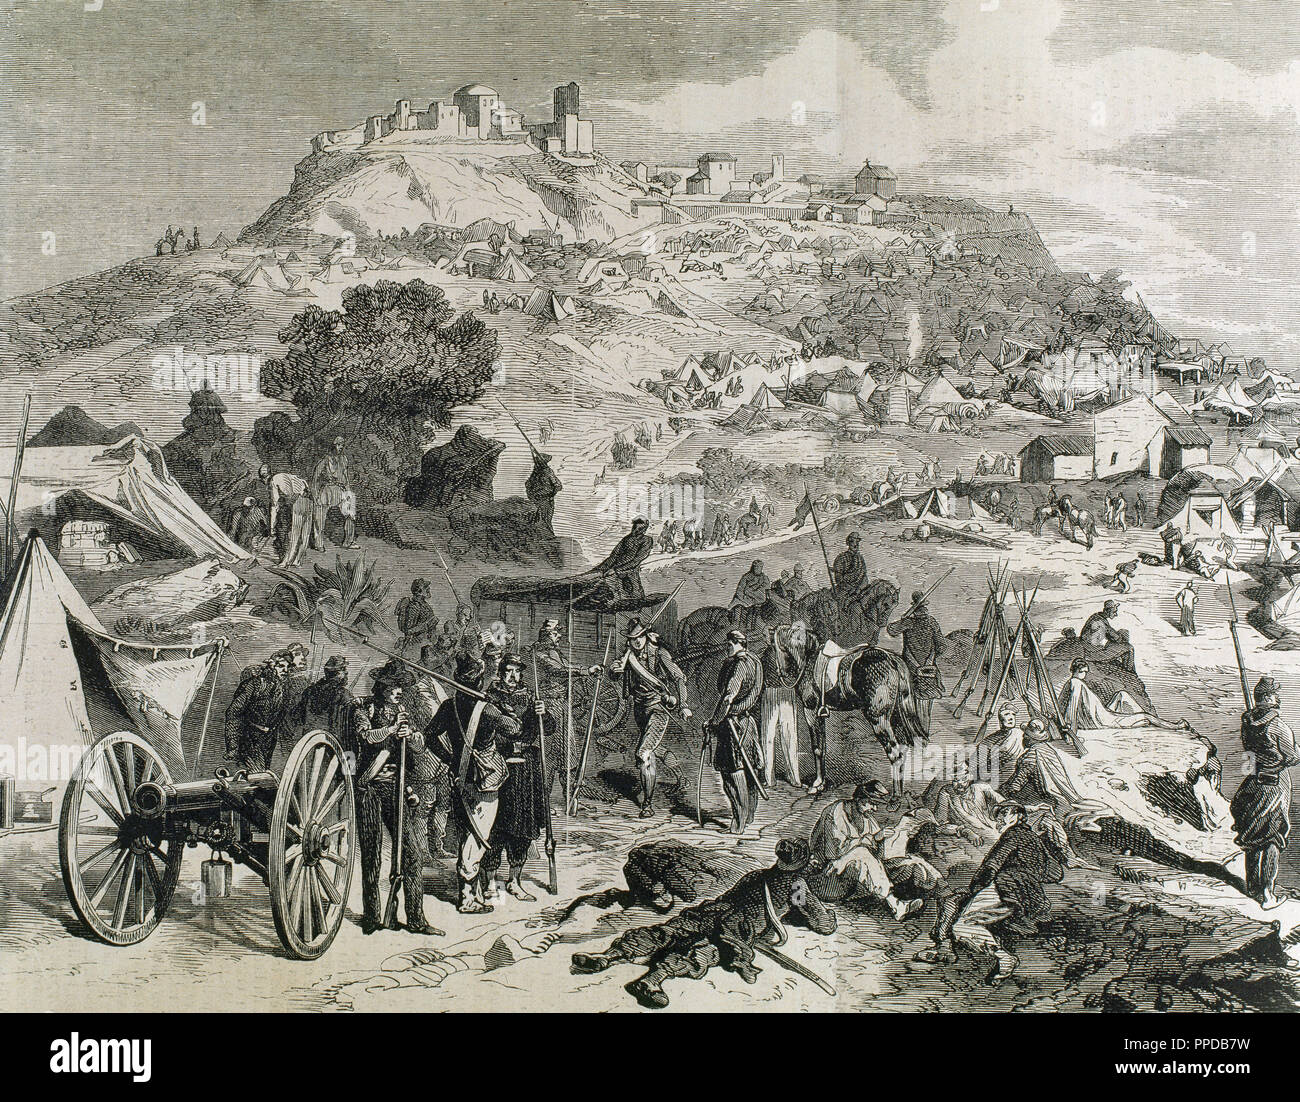 Italian unification (1859-1924). Conquest of Sicily (1860). Garibaldi goes to Palermo with the thousand volunteers called Redshirts. Camp of the troops of Garibaldi in Castrogiovanni. Engraving in 'L'Illustration (1860) by M. Sutter. Stock Photo